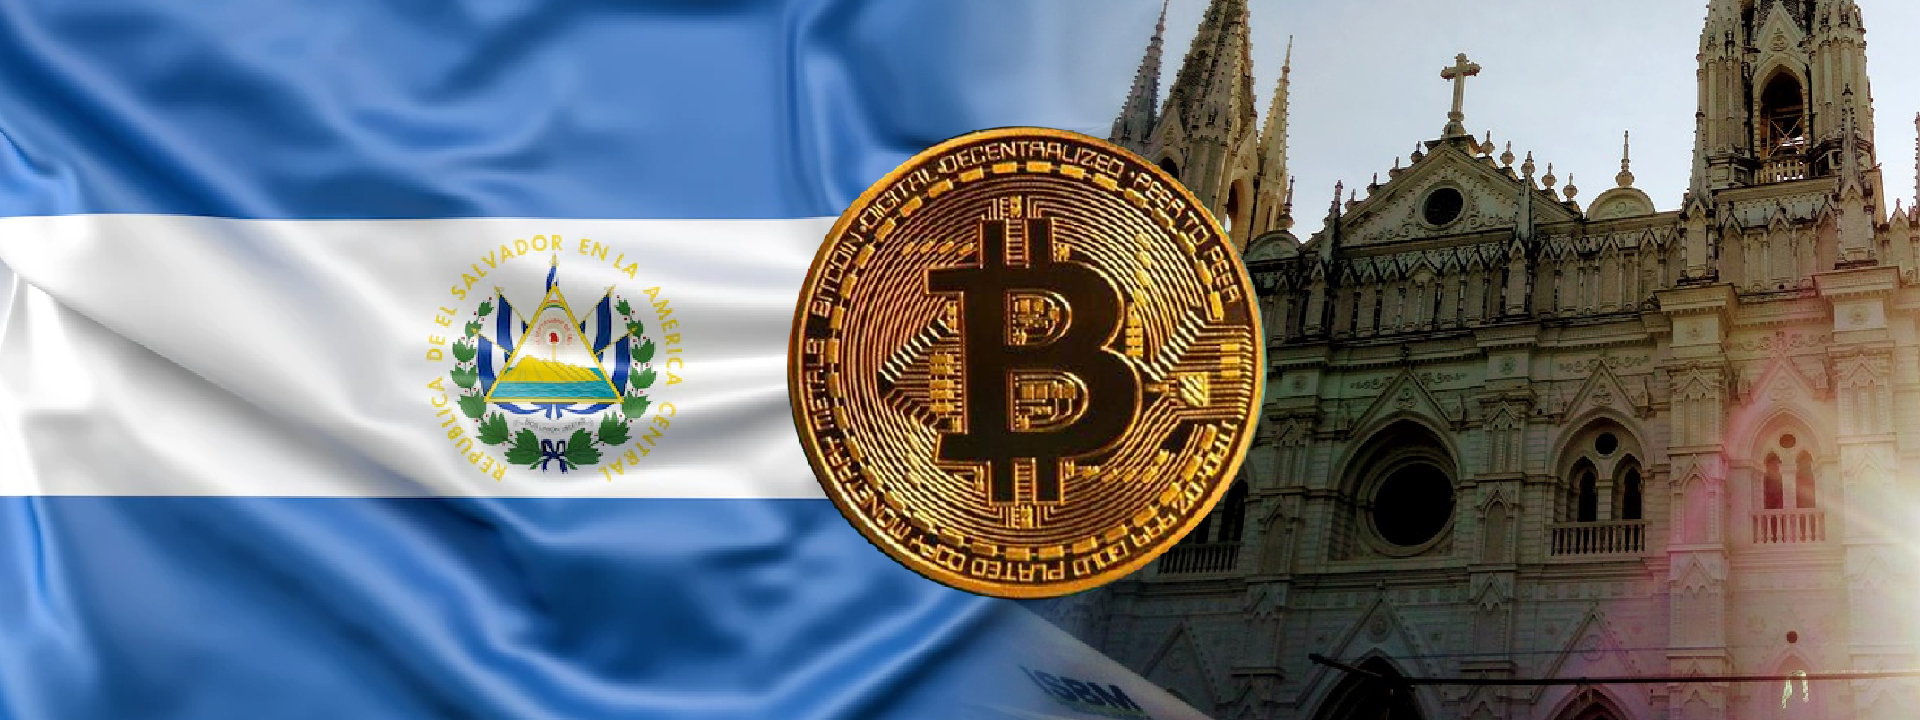 Here's the story of 'Bitcoin Beach' in El Salvador - The Coin Republic ...